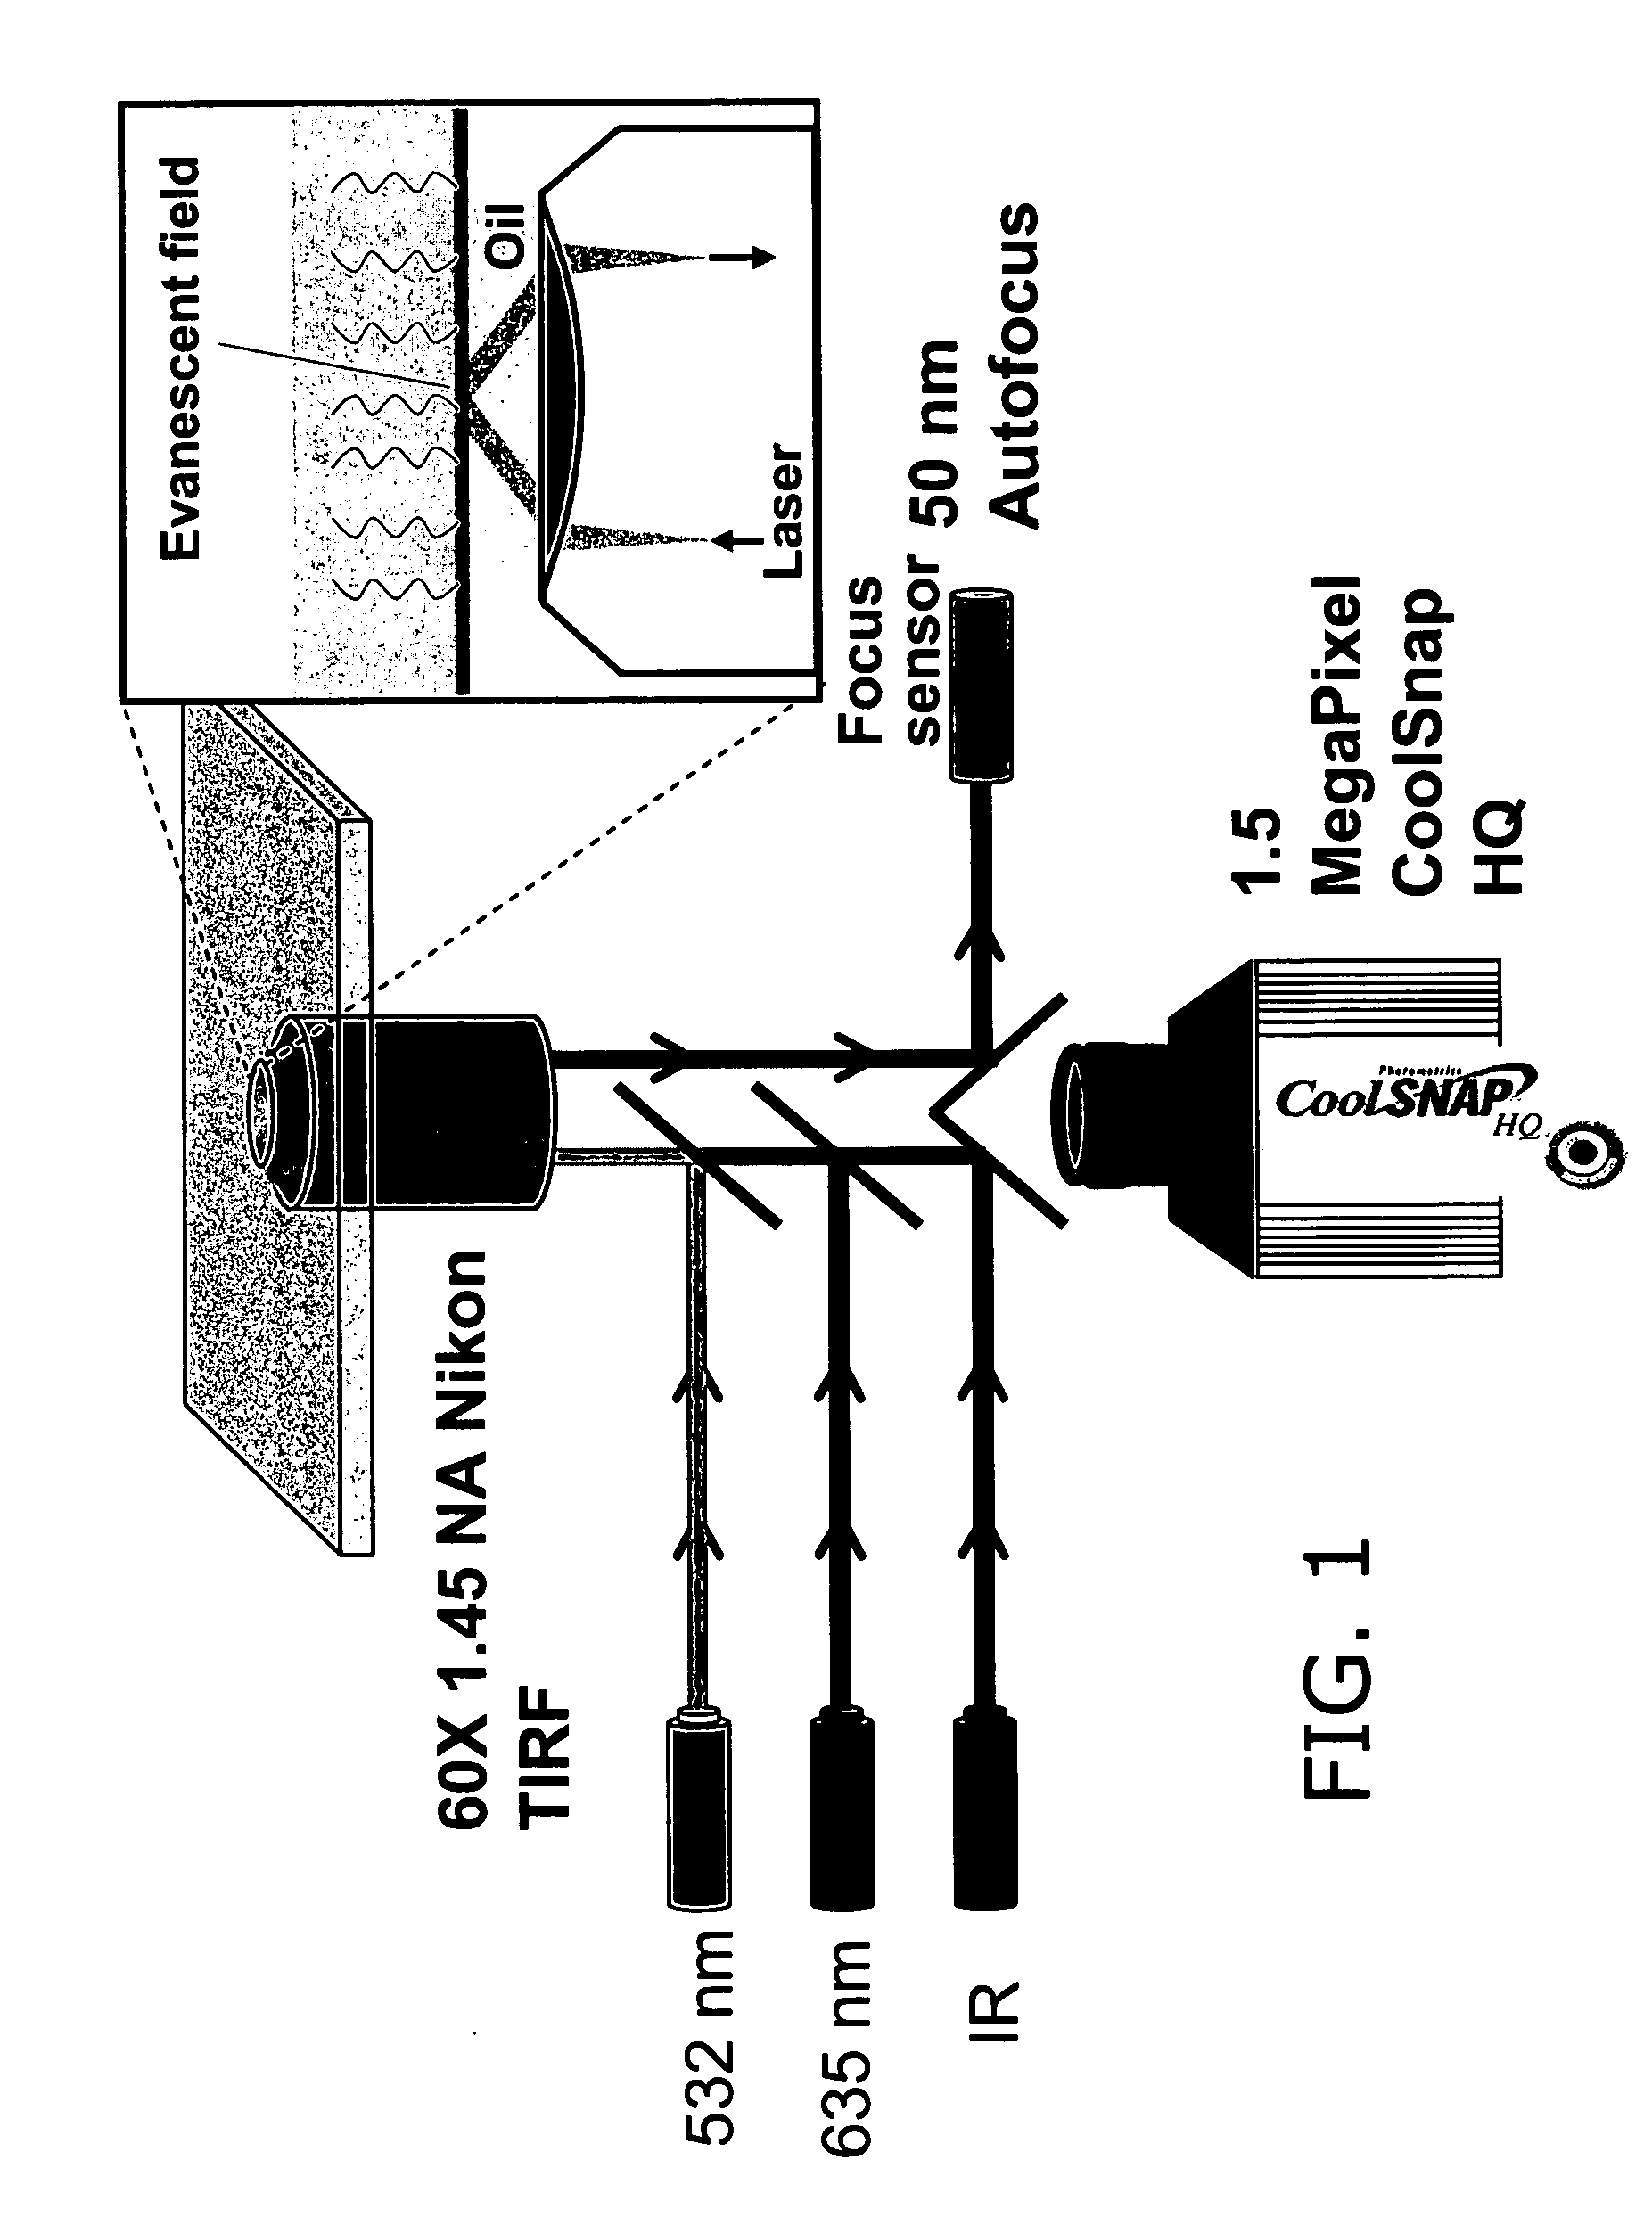 Sample preparation method and apparatus for nucleic acid sequencing